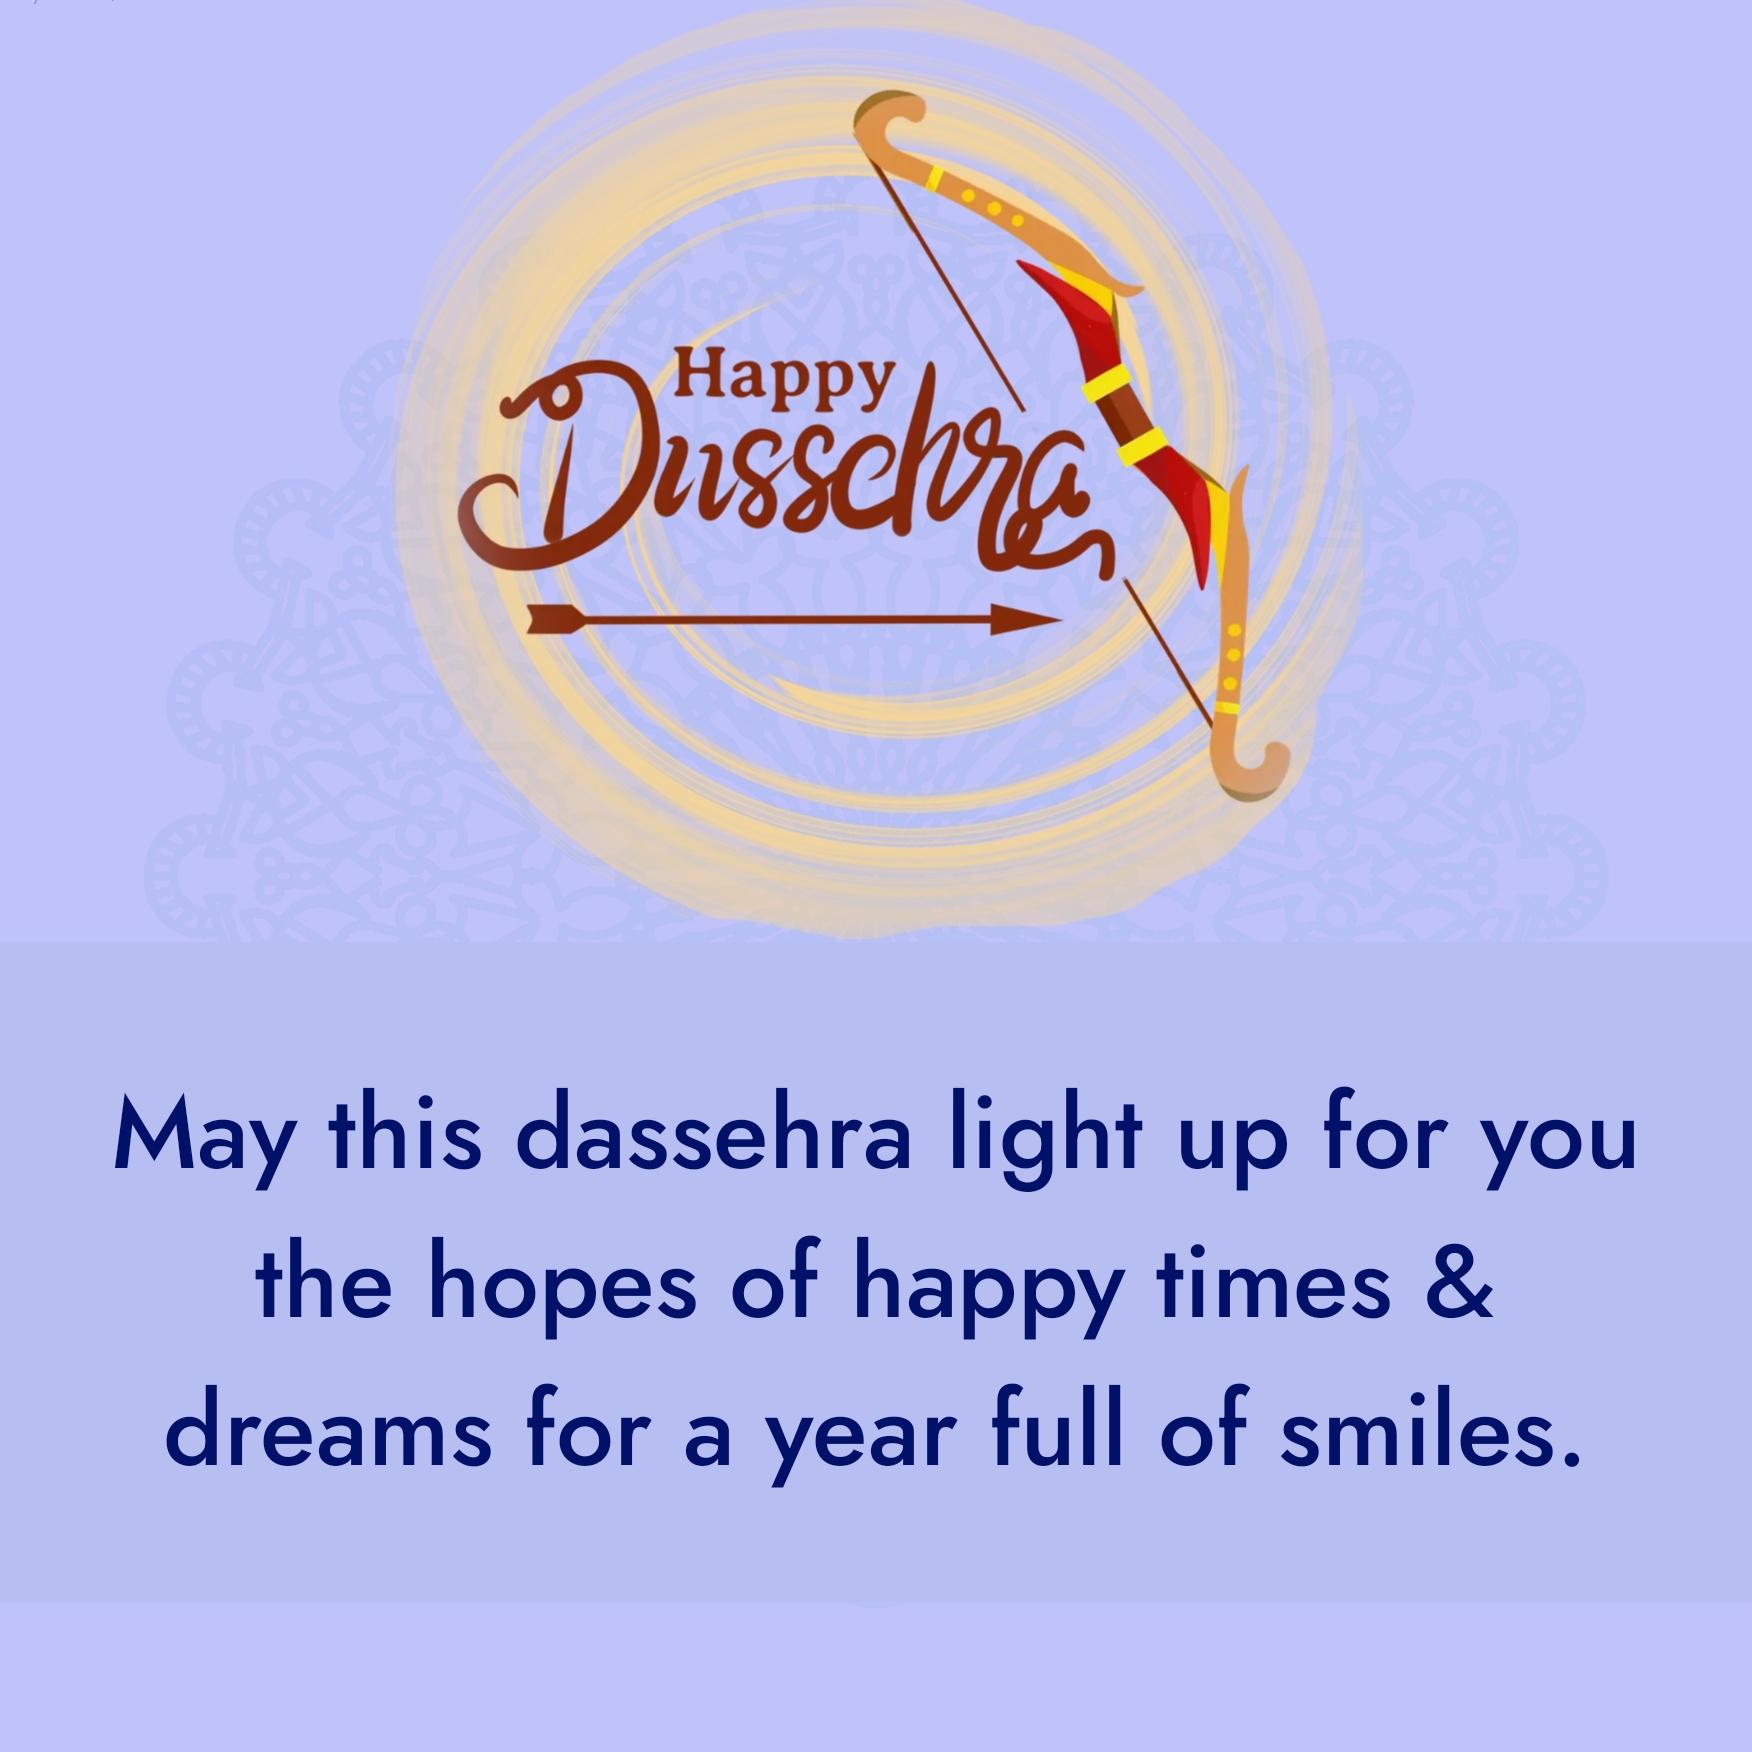 May this dassehra light up for you the hopes of happy times